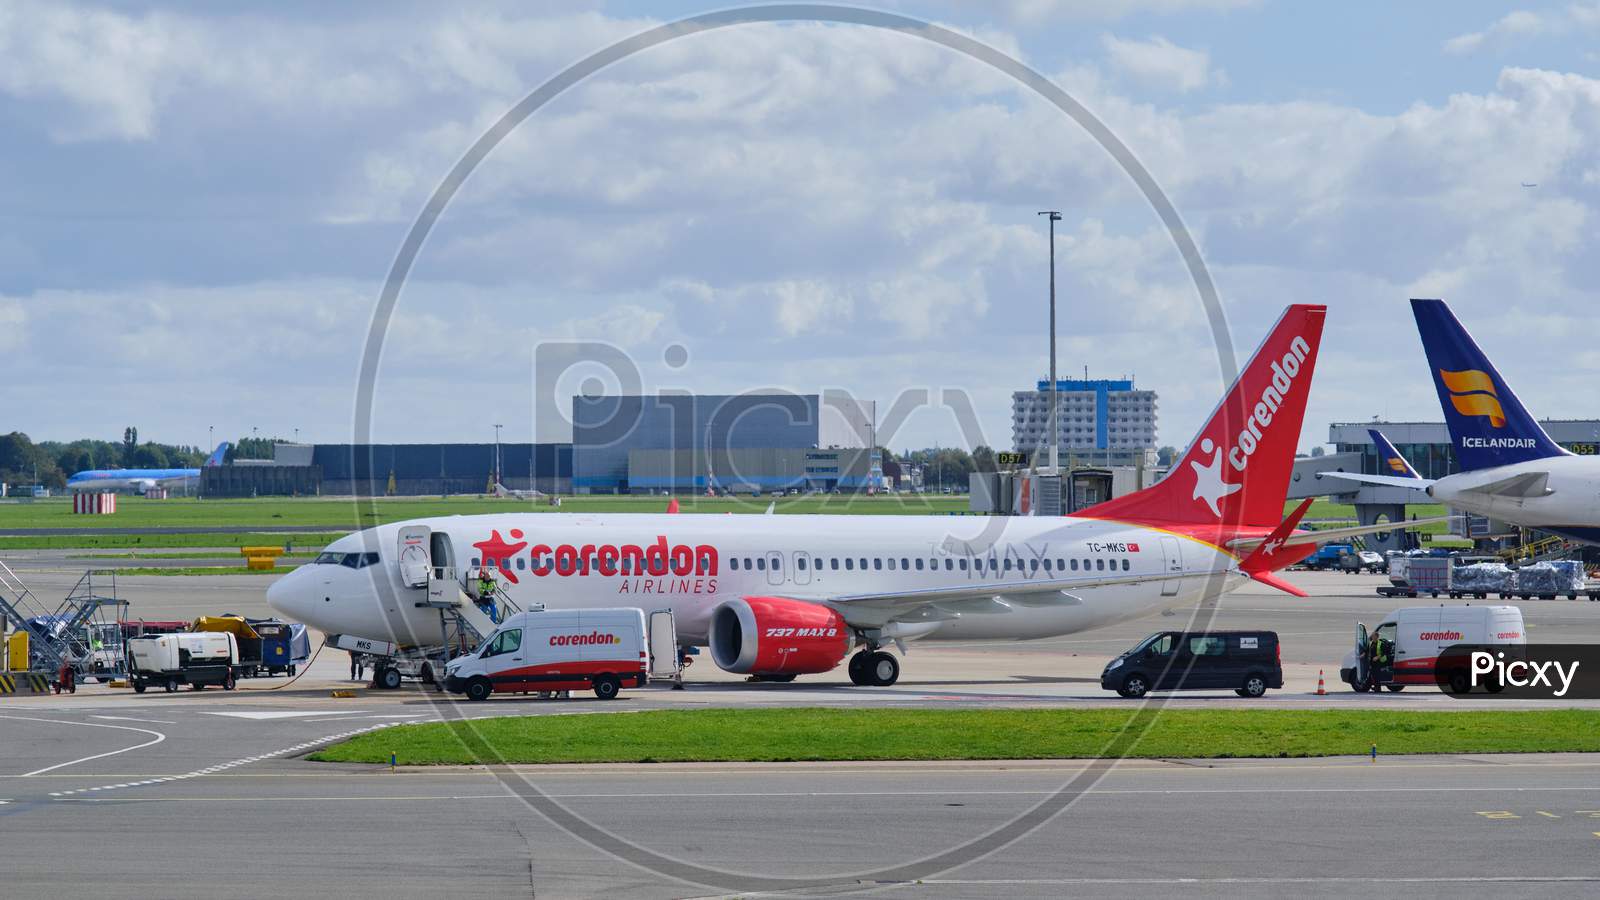 Corendon Airlines Boeing 737 Max 8 At Amsterdam Airport Schiphol In Amsterdam, Netherlands